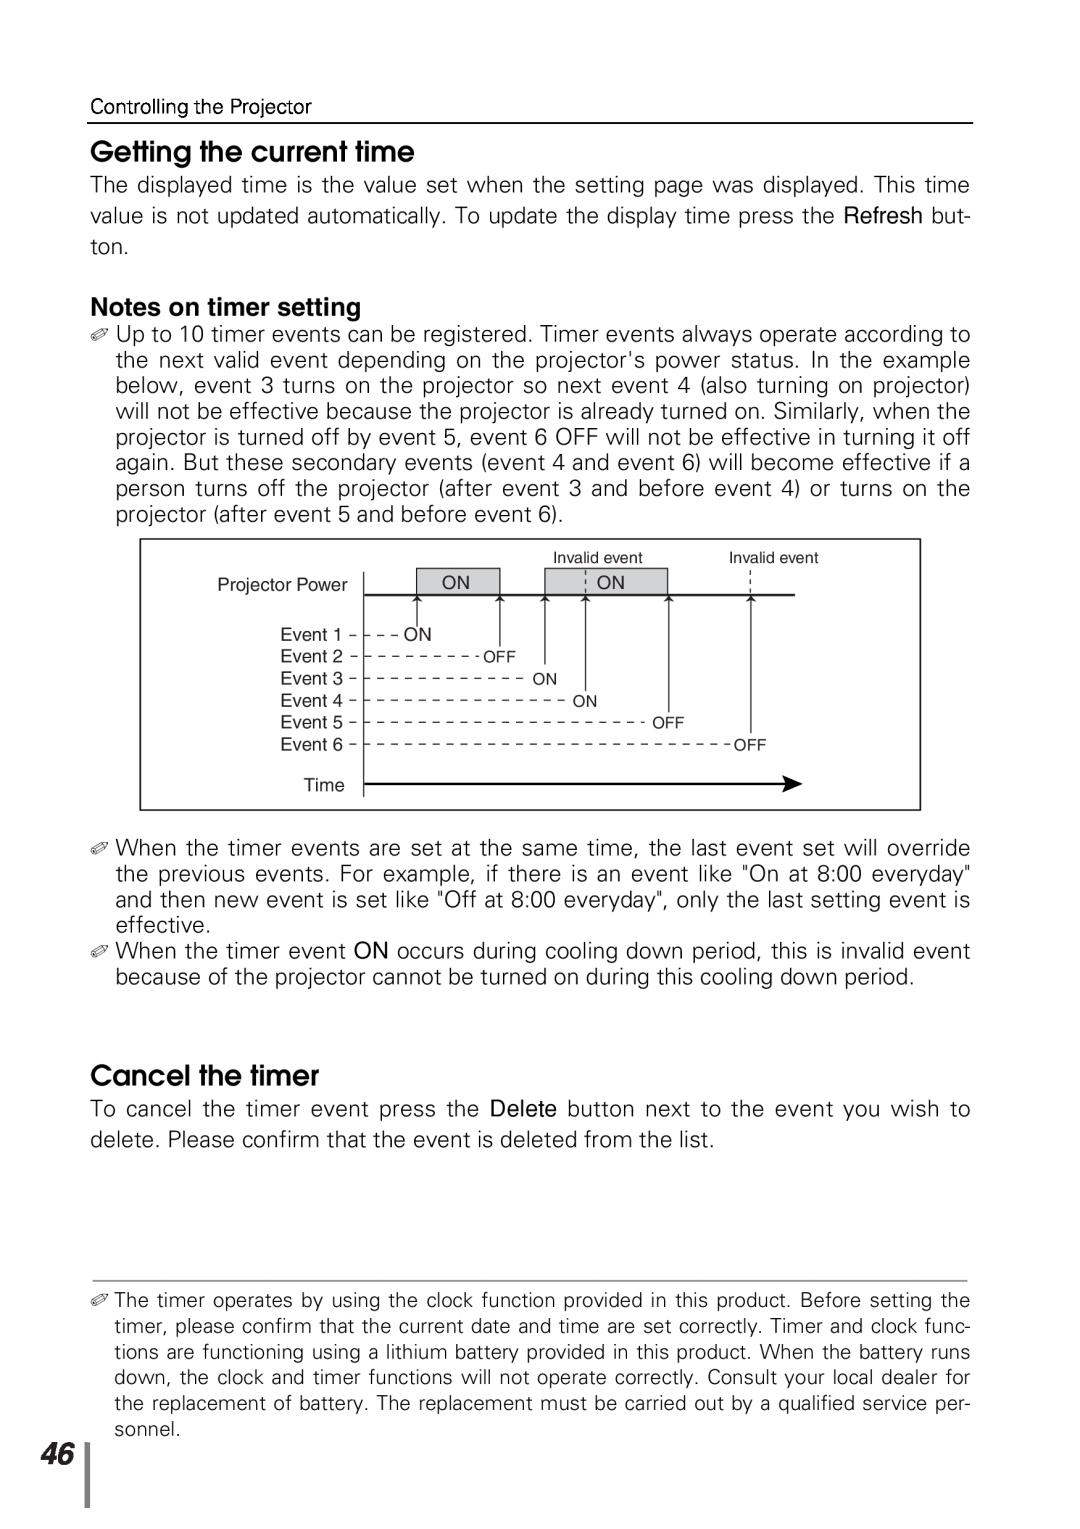 Sanyo POA-PN10 owner manual Getting the current time, Cancel the timer, Notes on timer setting 